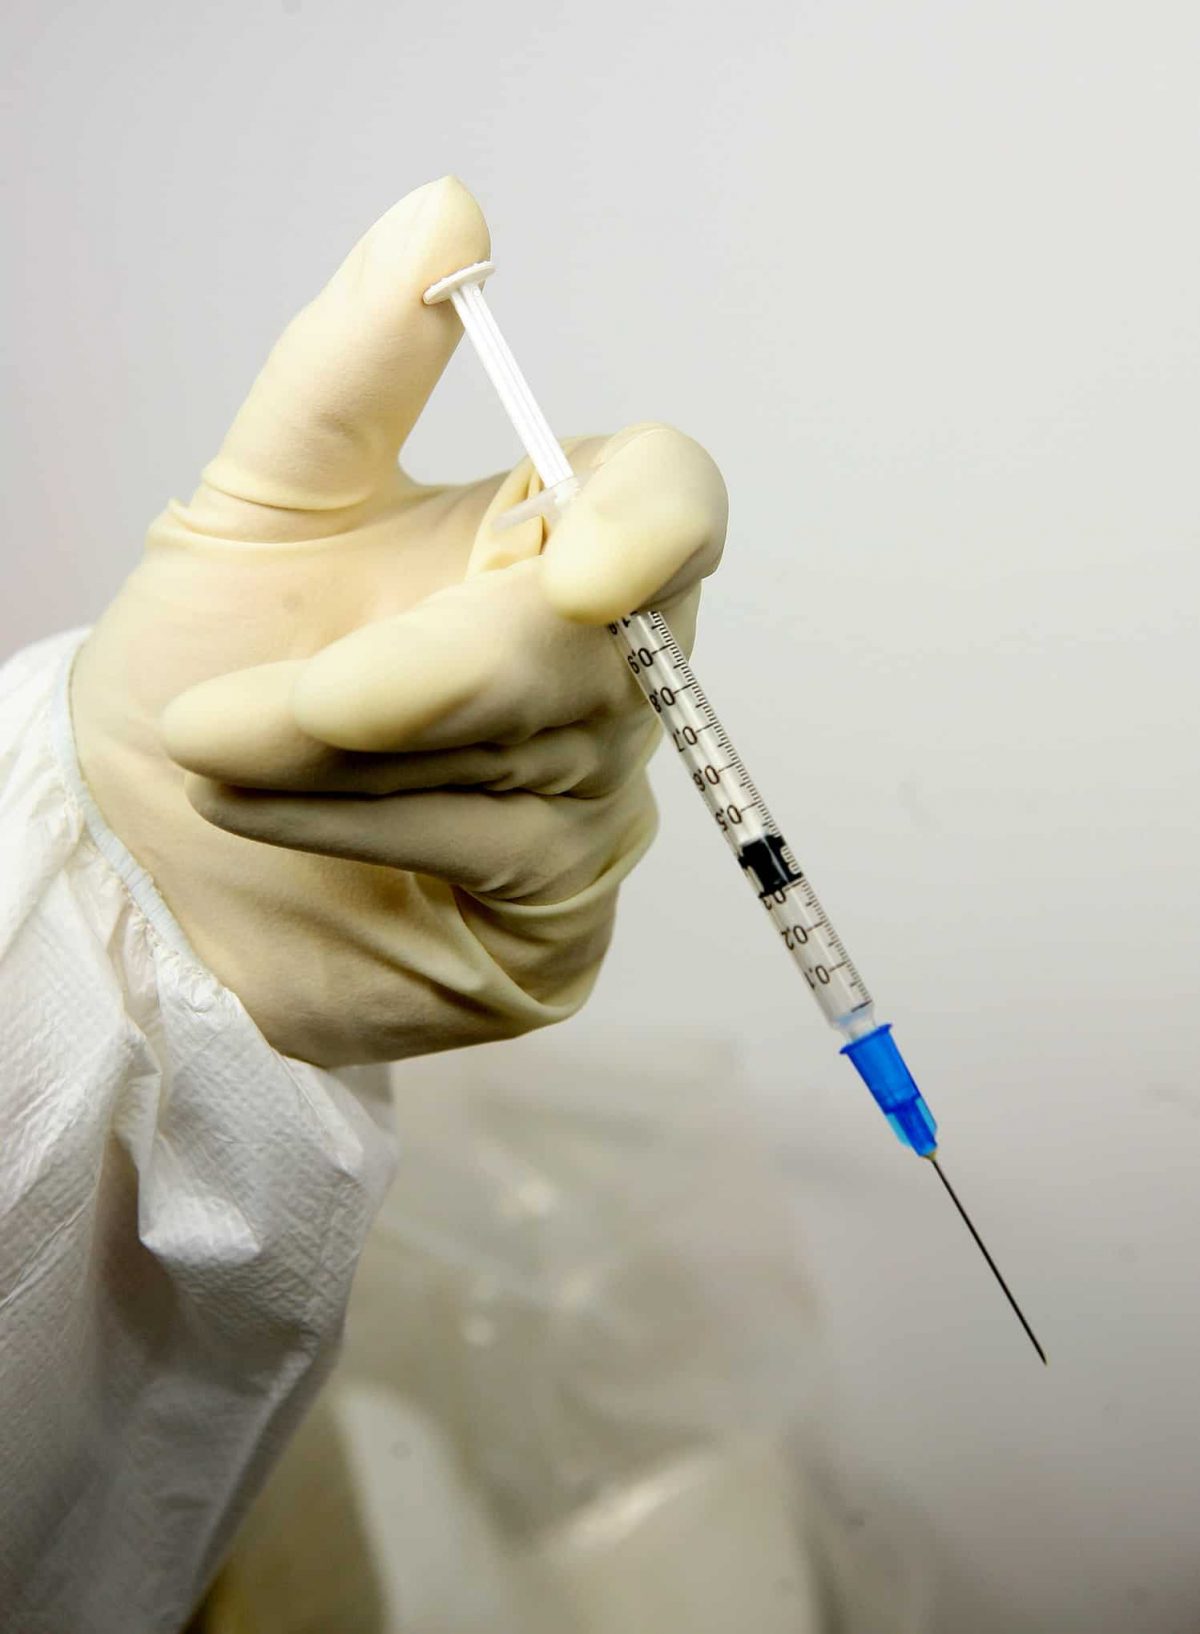 A general view of a hypodermic needle.